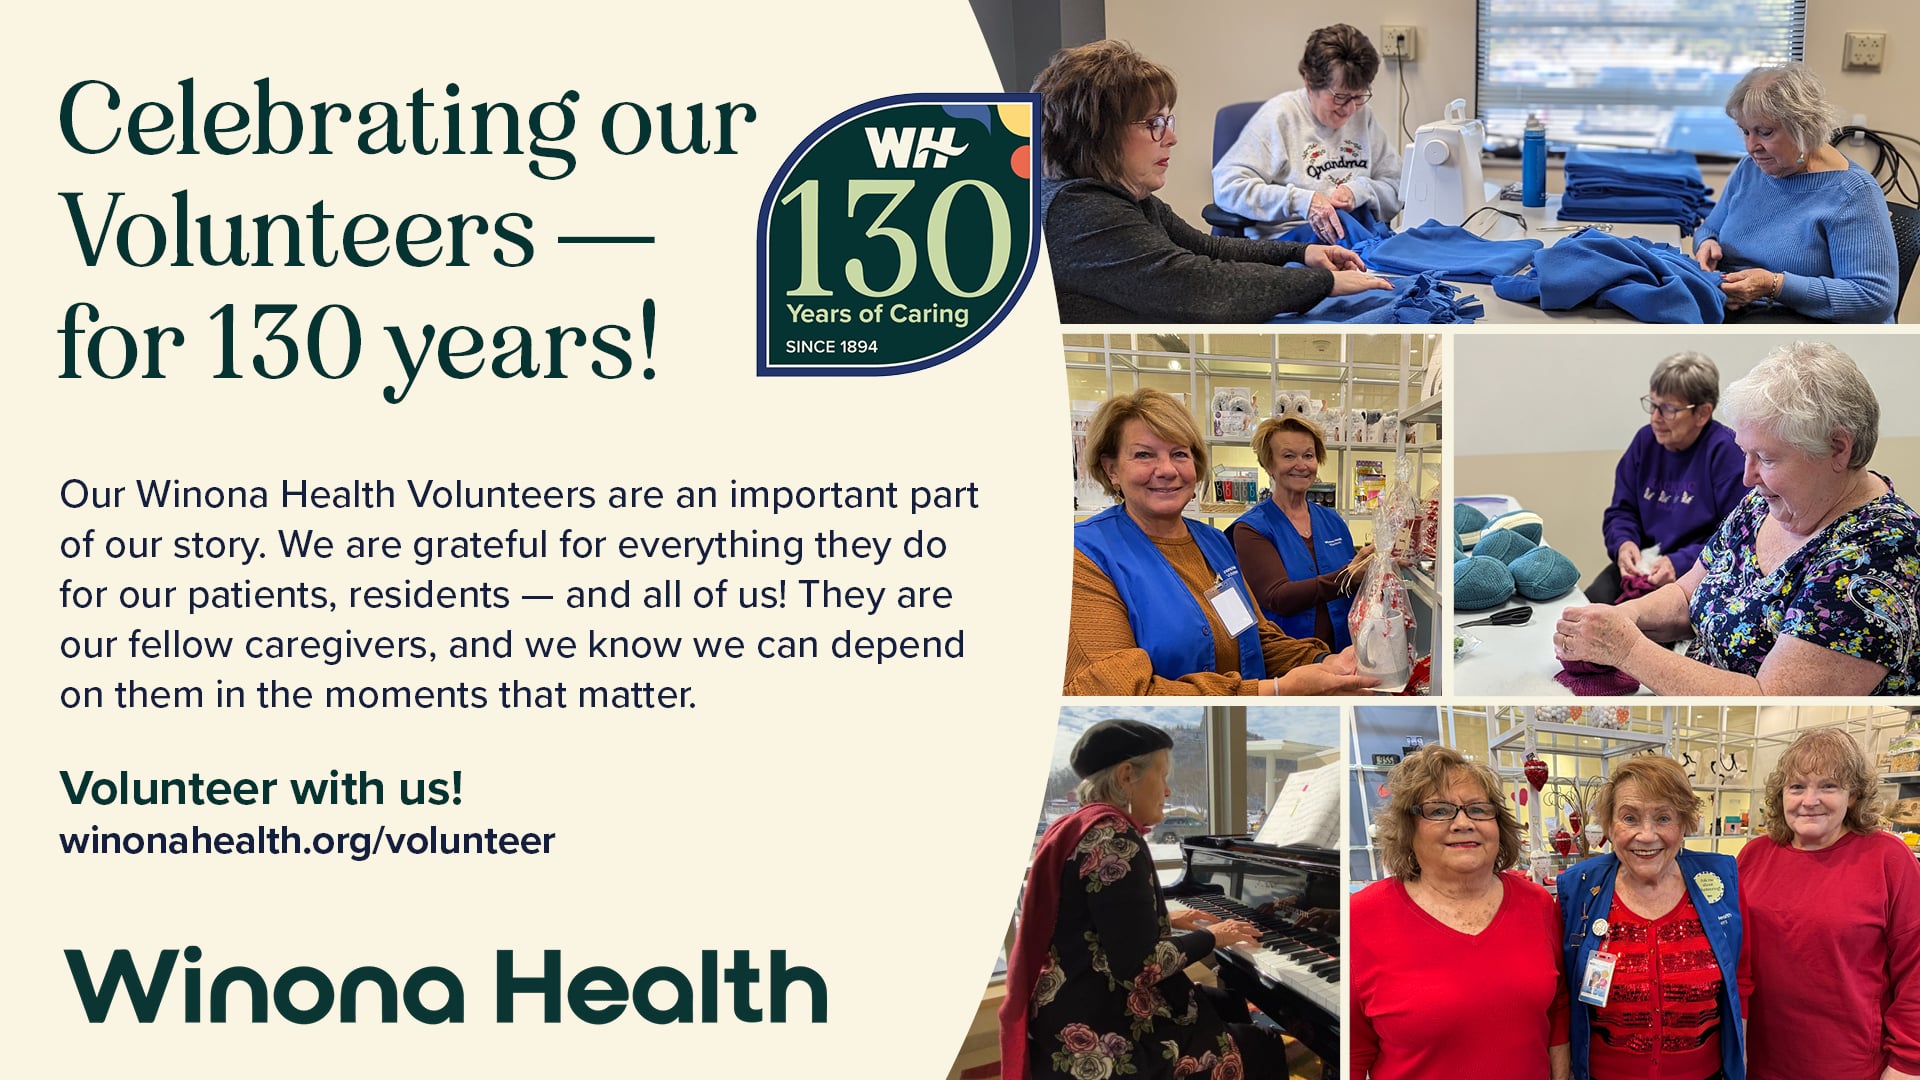 Celebrating our Volunteers for 130 Years!